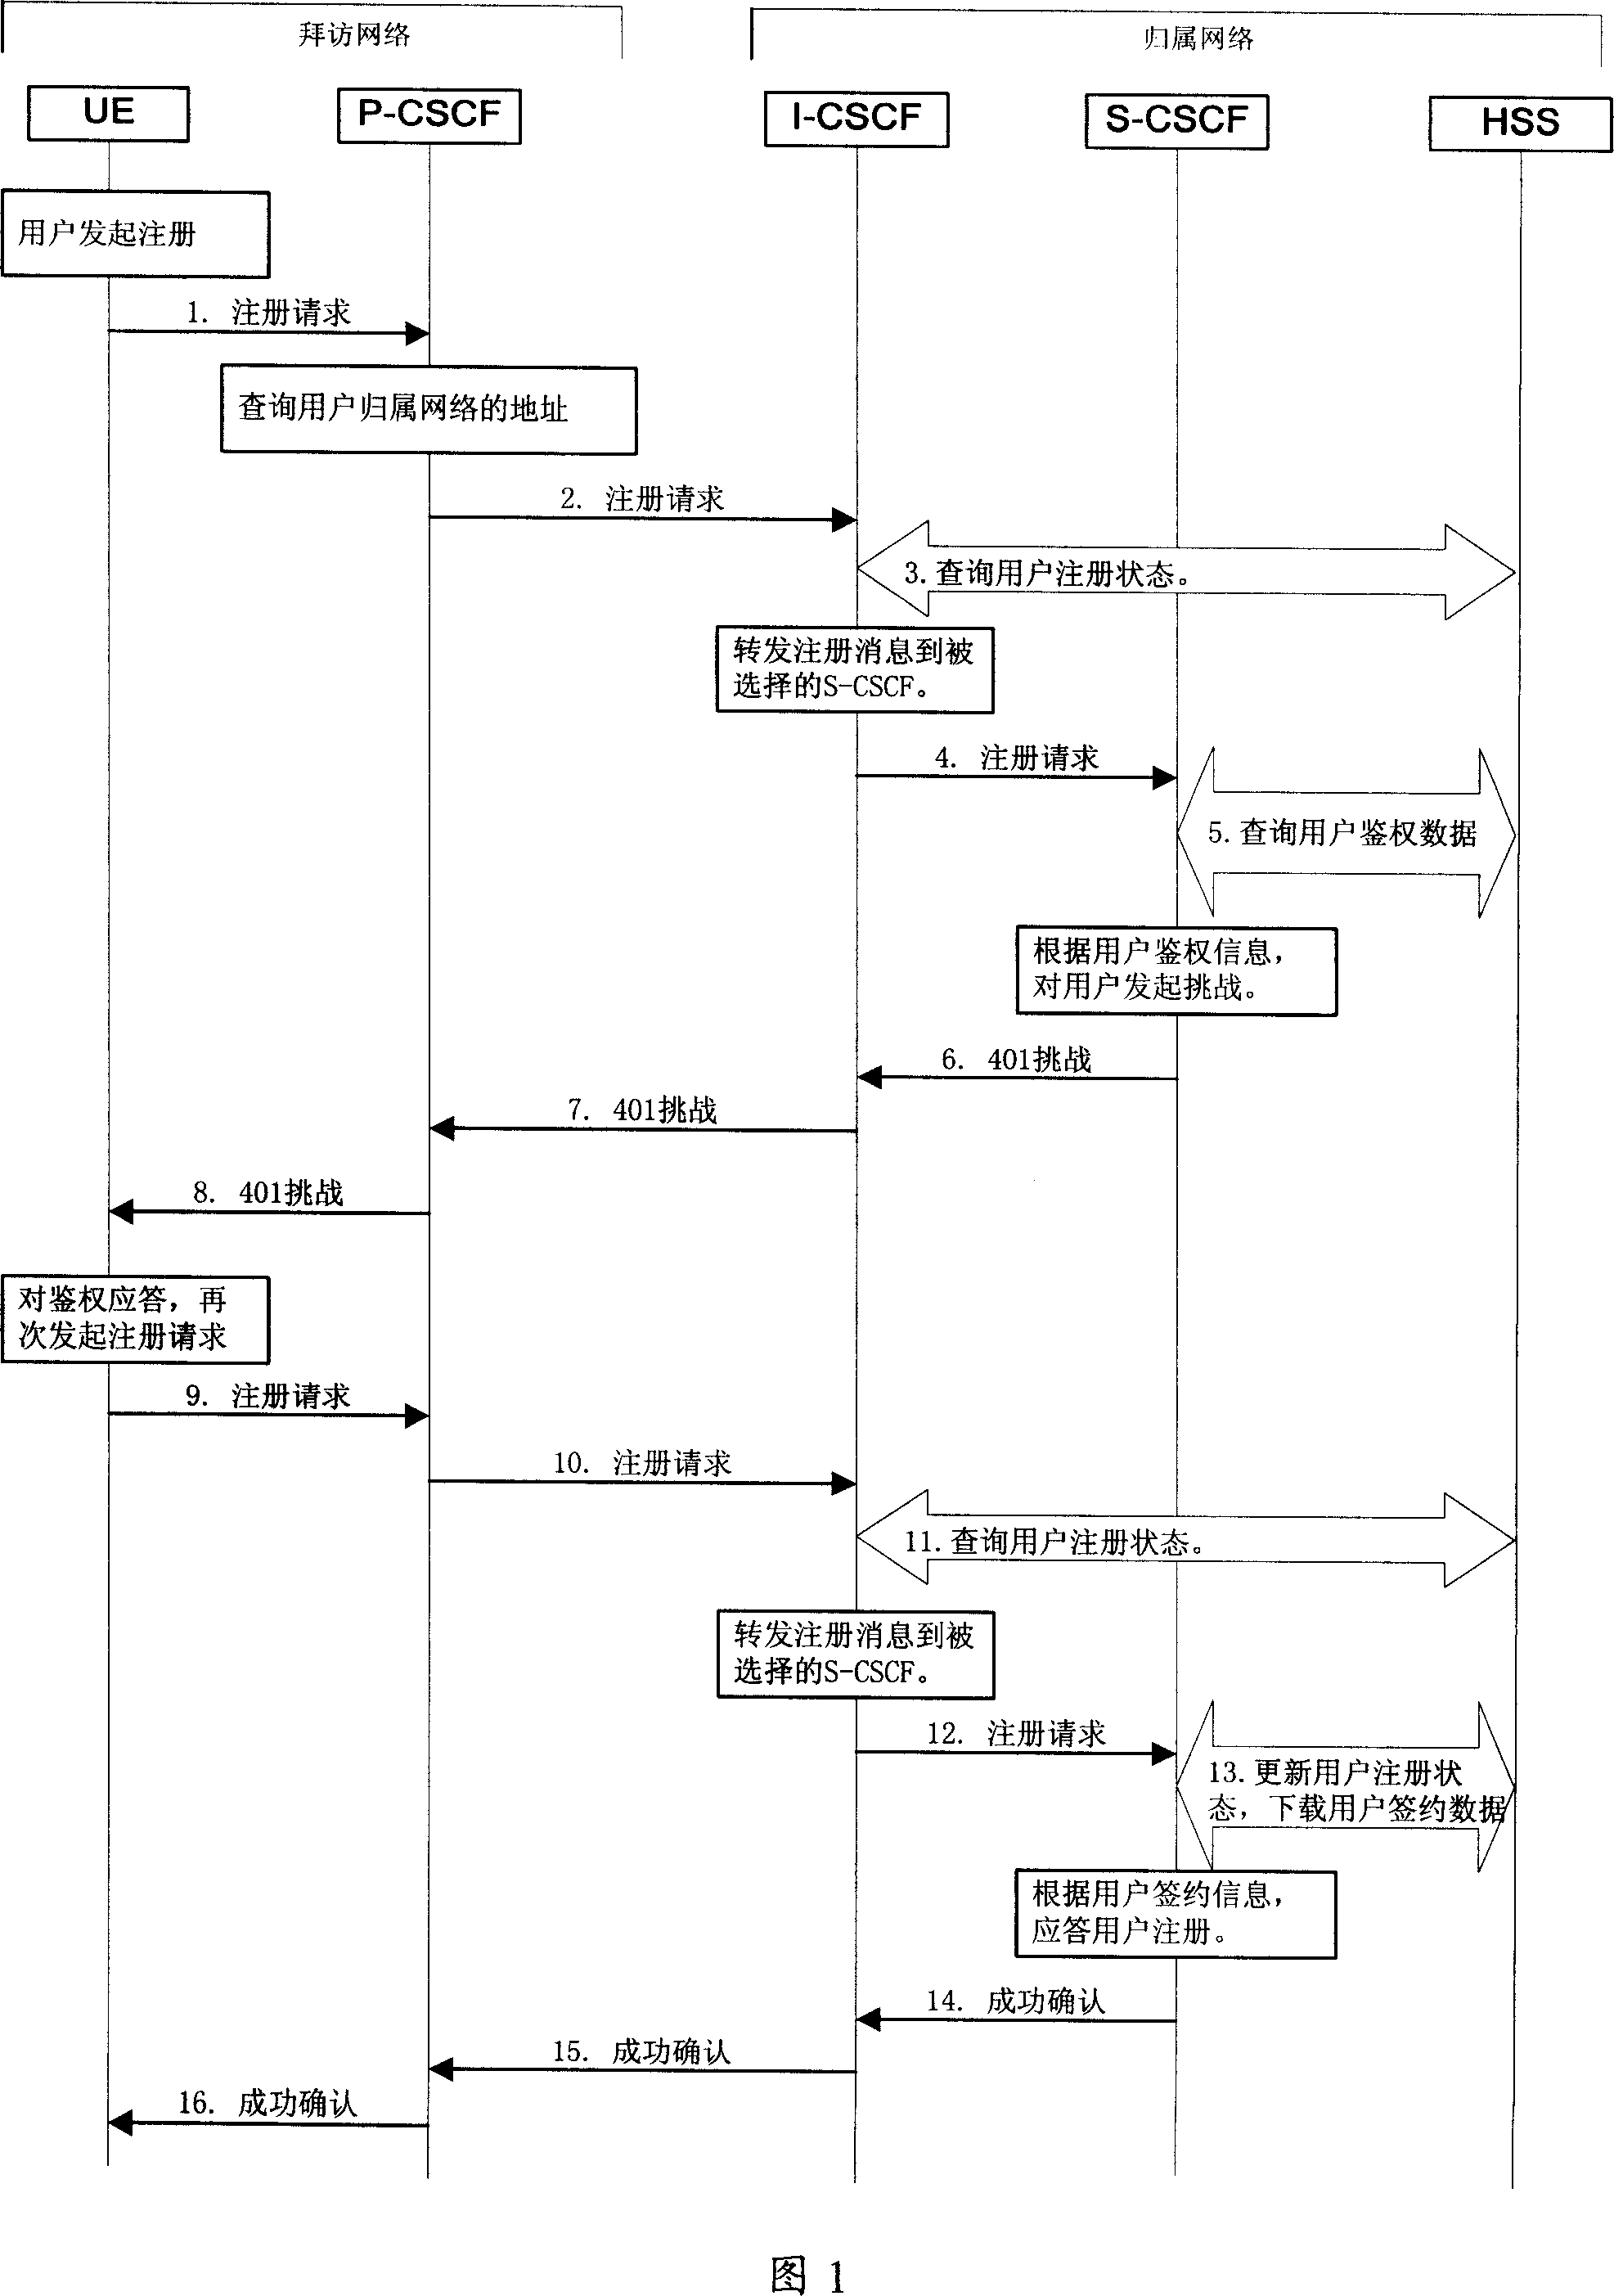 Method for authenticating user terminal